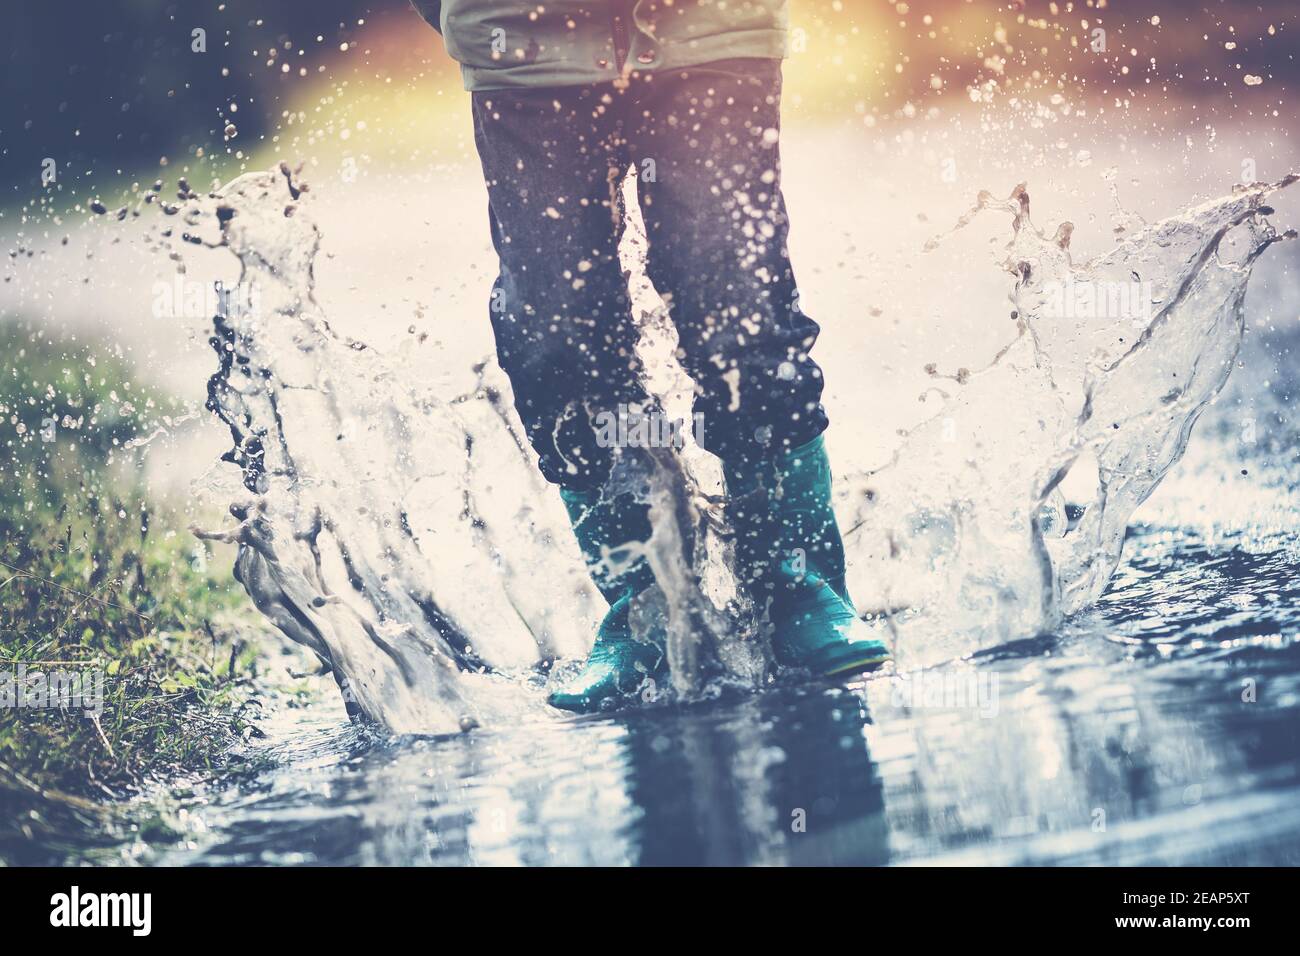 Child walking in wellies in puddle on rainy weather Stock Photo